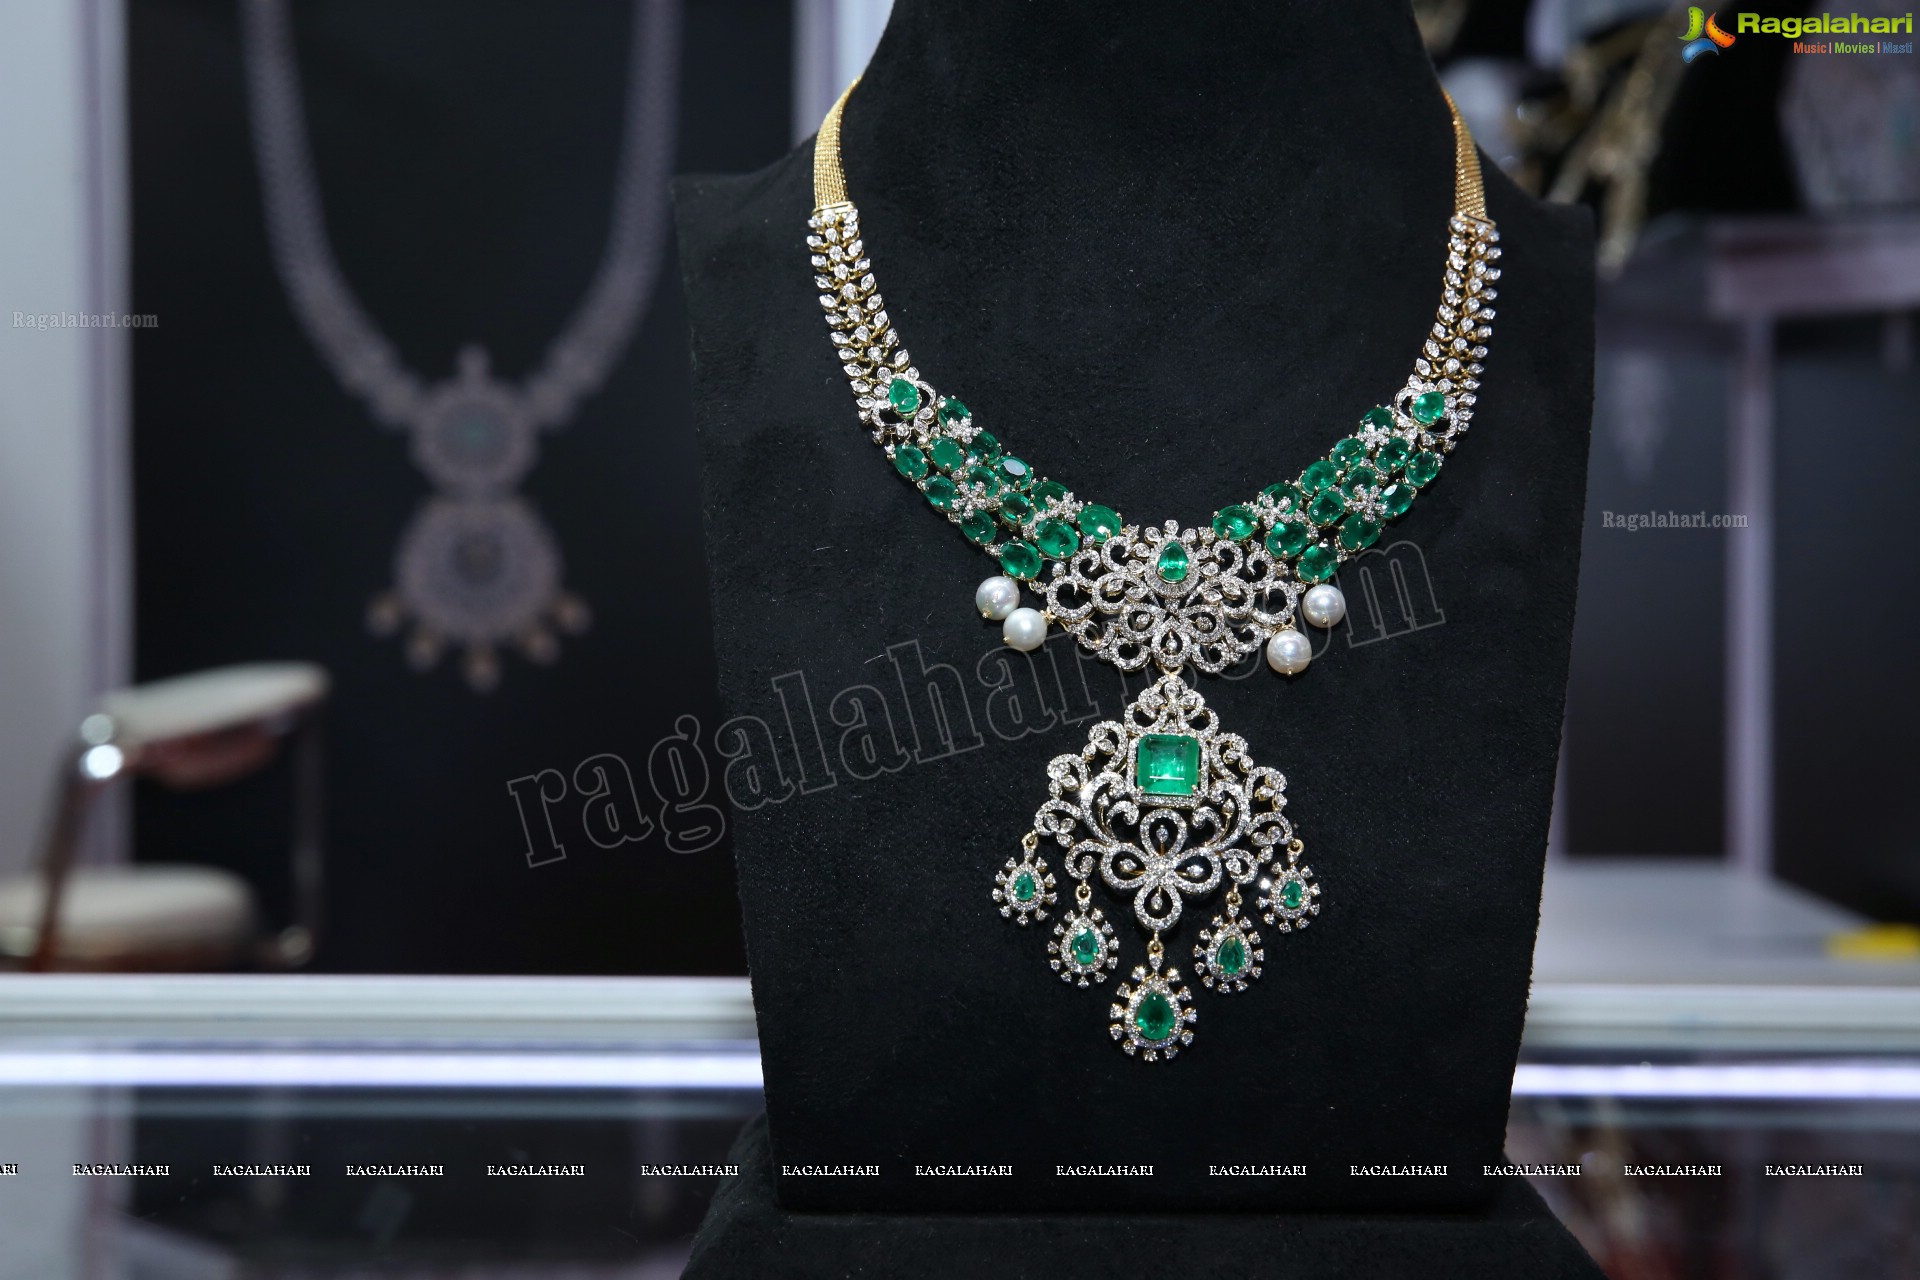 Hyderabad Jewellery, Pearl and Gem Fair Showcases Splendid Collection in its 12th Edition